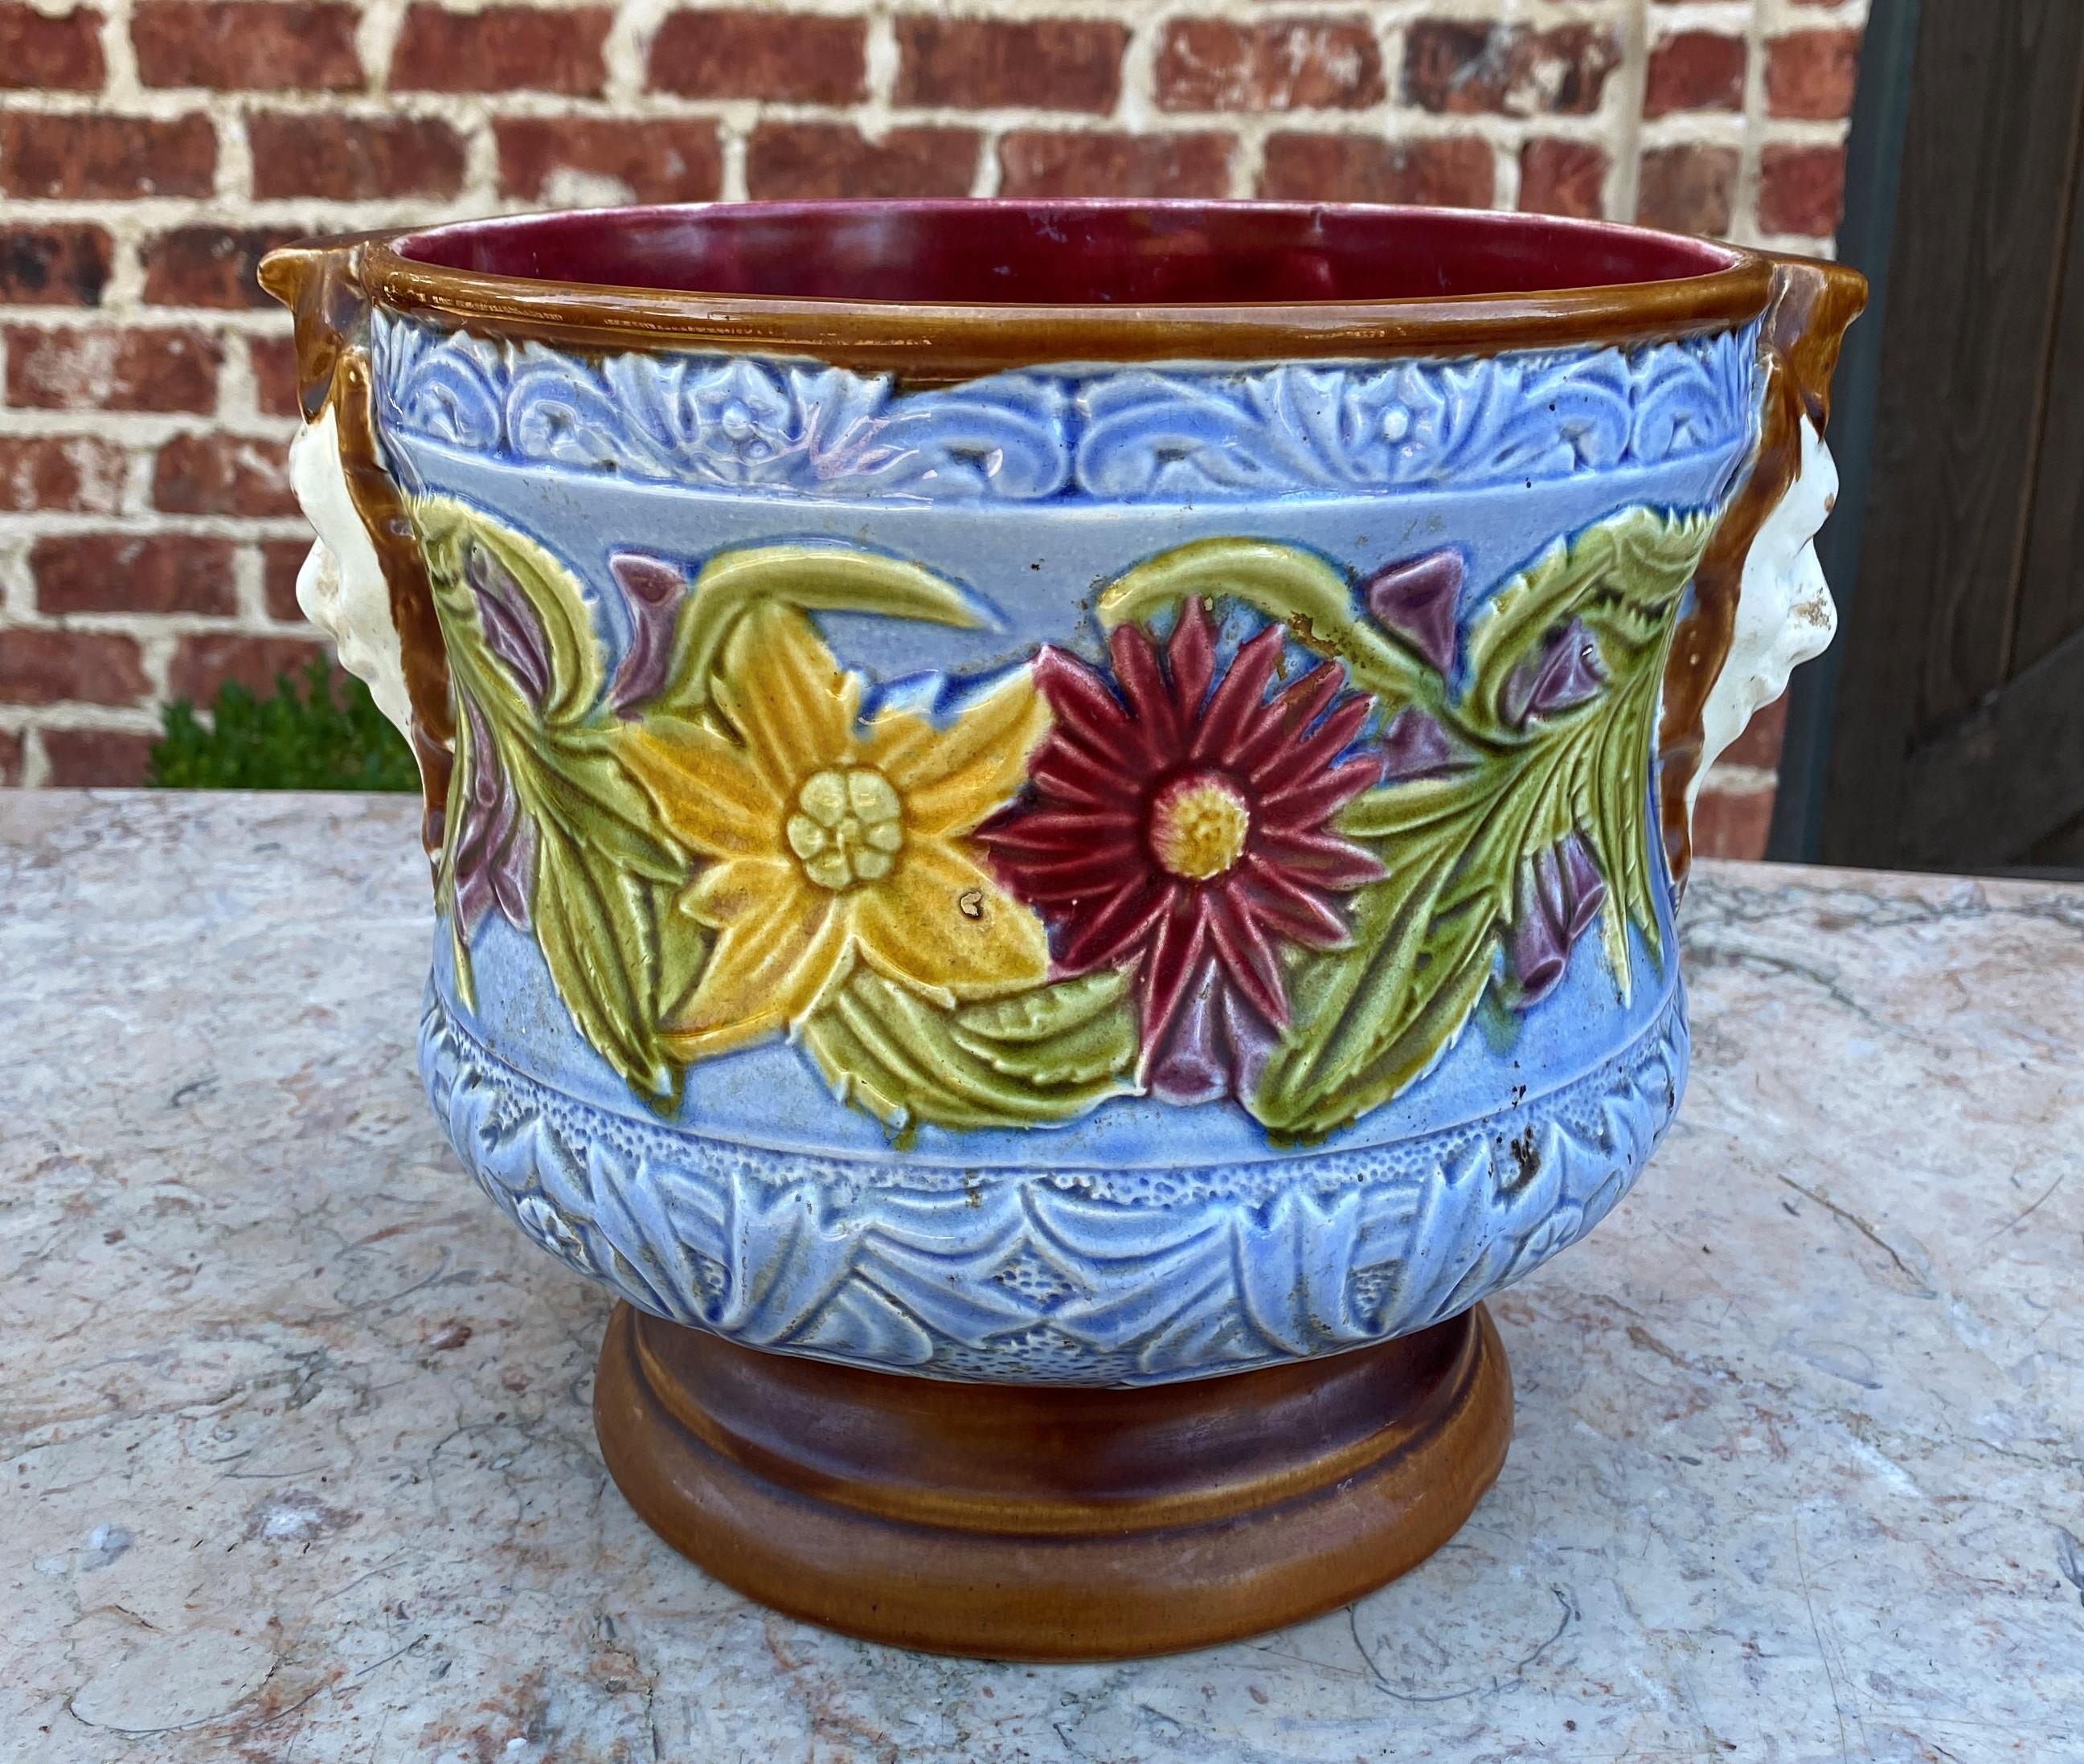 Gorgeous large antique English Majolica cache pot, planter, jardiniere, flower pot or vase~~Art Nouveau~~c. 1900

Authentic English Majolica planter or cache pot~~vibrant light blue background with green, yellow, maroon and purple floral